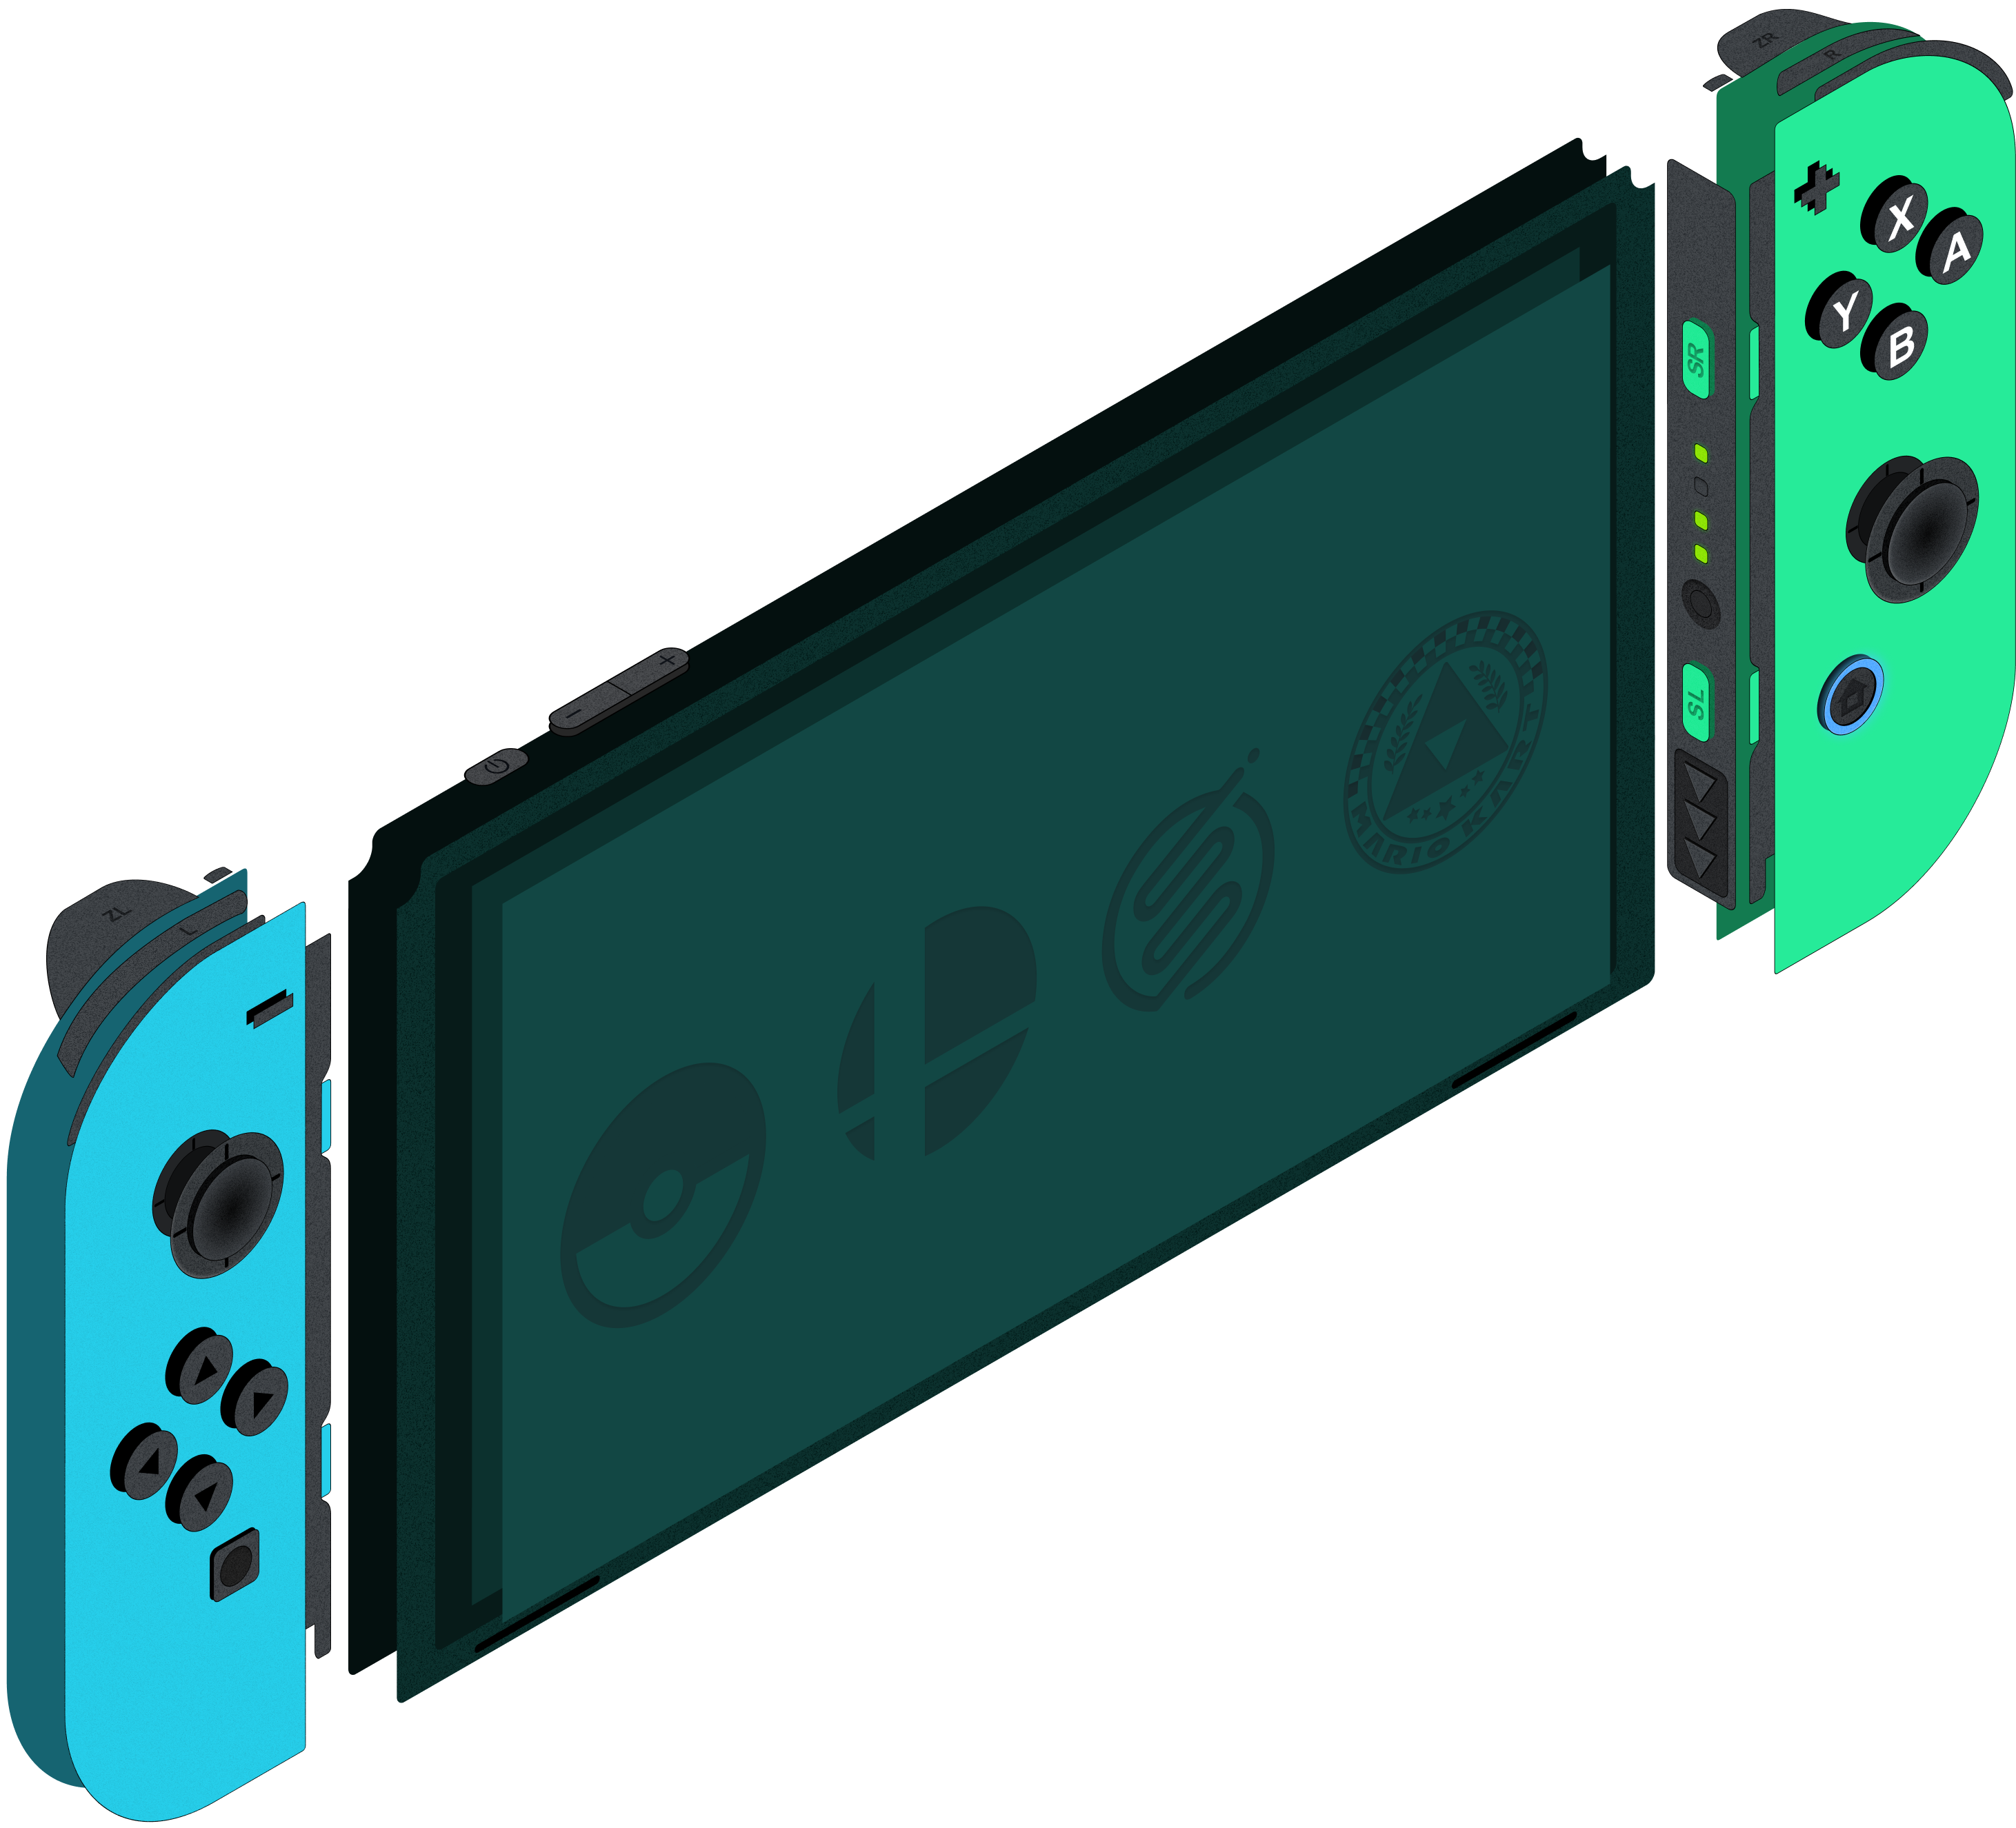 Isometric design of the Nintendo Switch game console